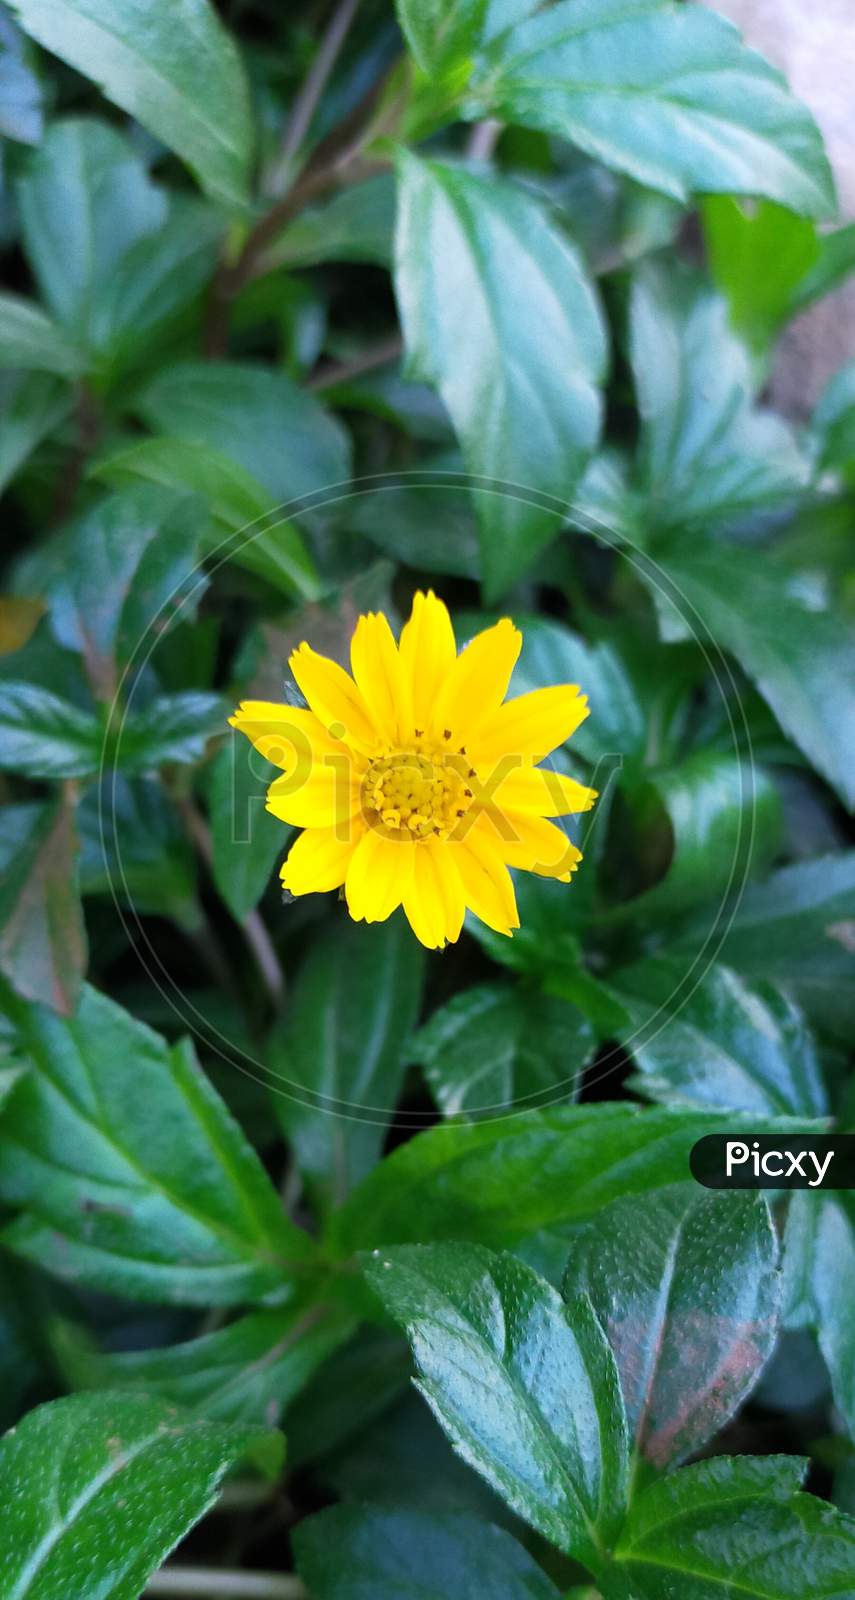 Yellow flower with green leaves